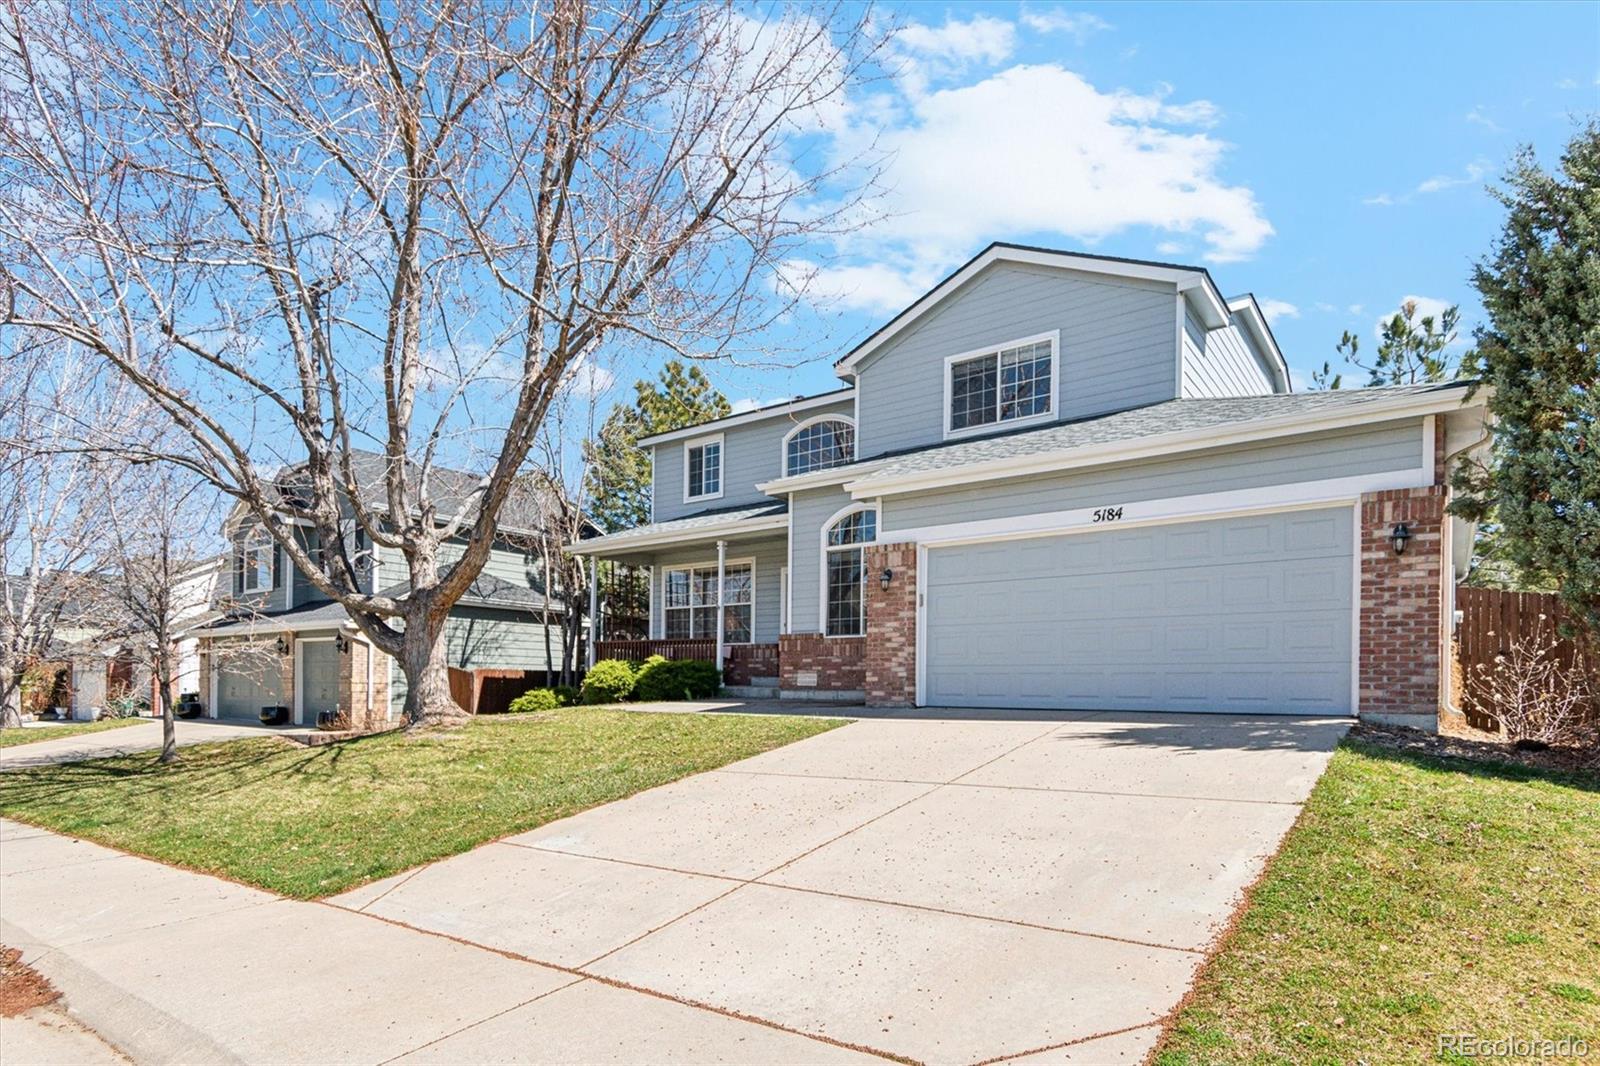 5184 s biscay court, centennial sold home. Closed on 2024-04-17 for $650,000.